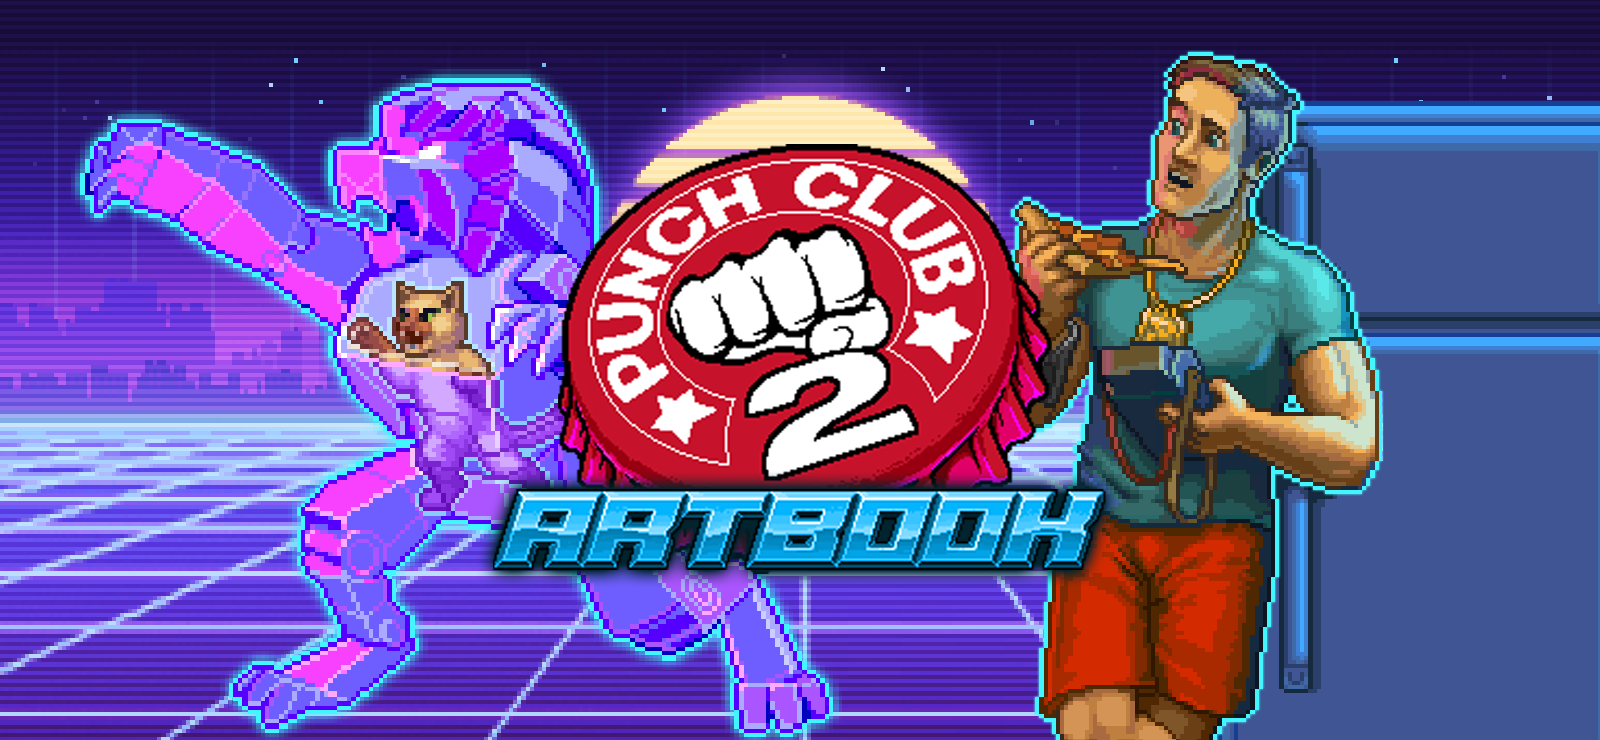 Punch Club 2: Fast Forward - Artbook And Comic Book